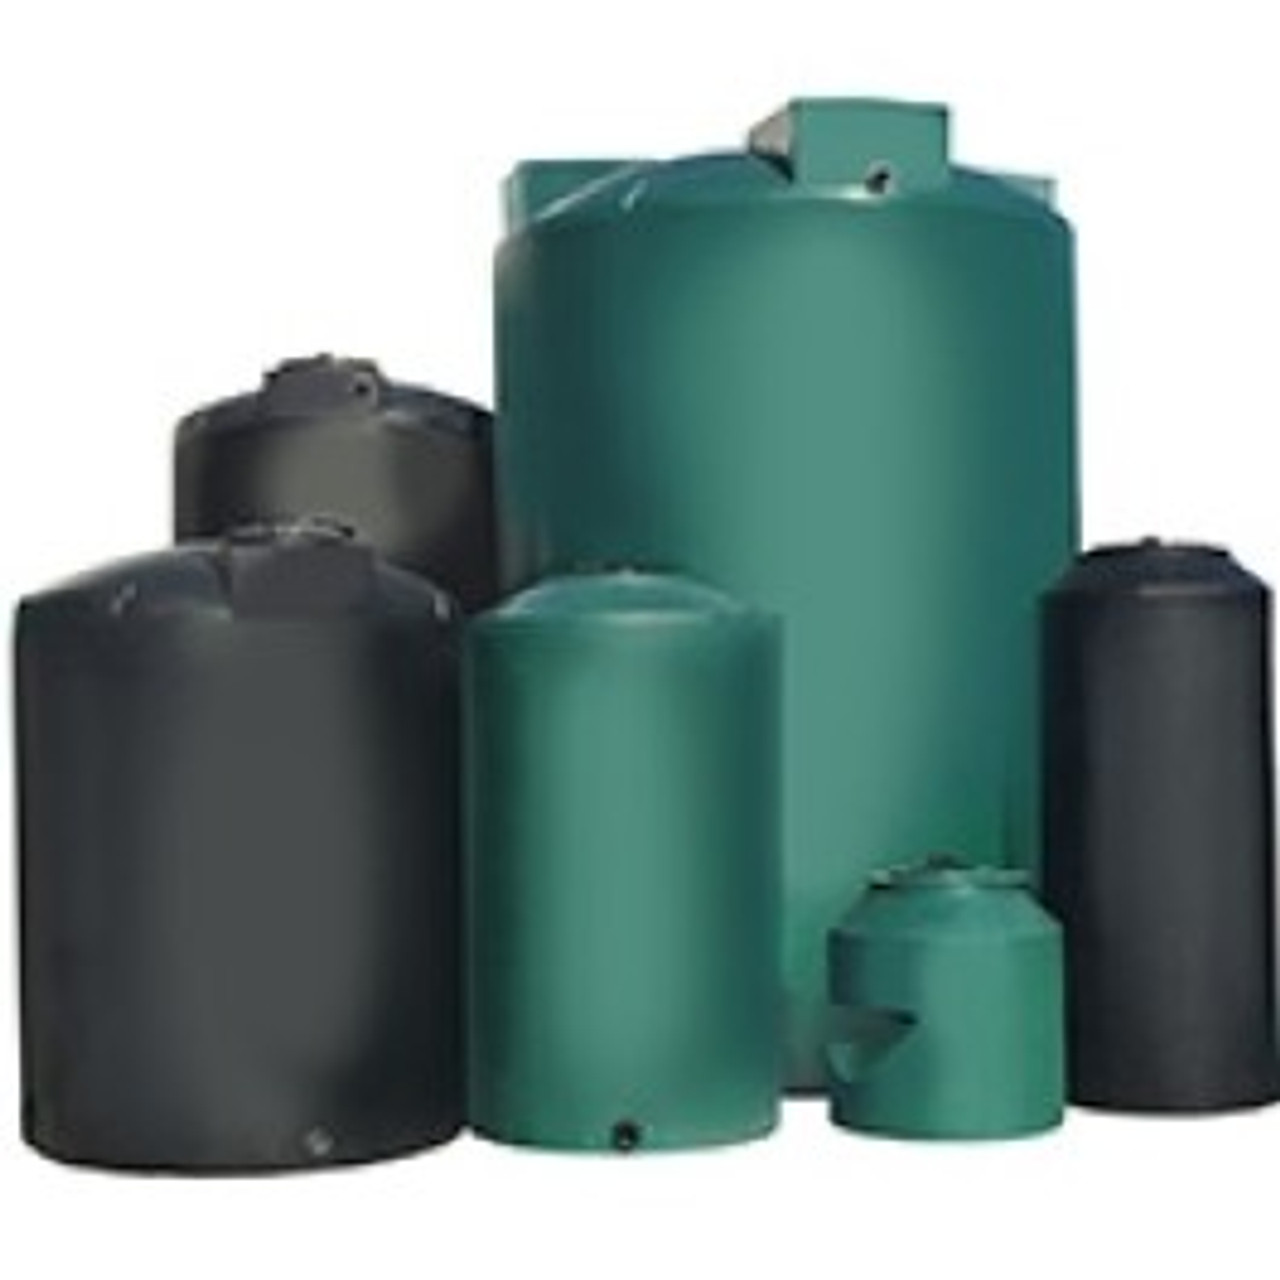 An image of a 300 Gallon Chem-Tainer Gray Plastic Vertical Water Storage Tank | TC3581IW-GRAY